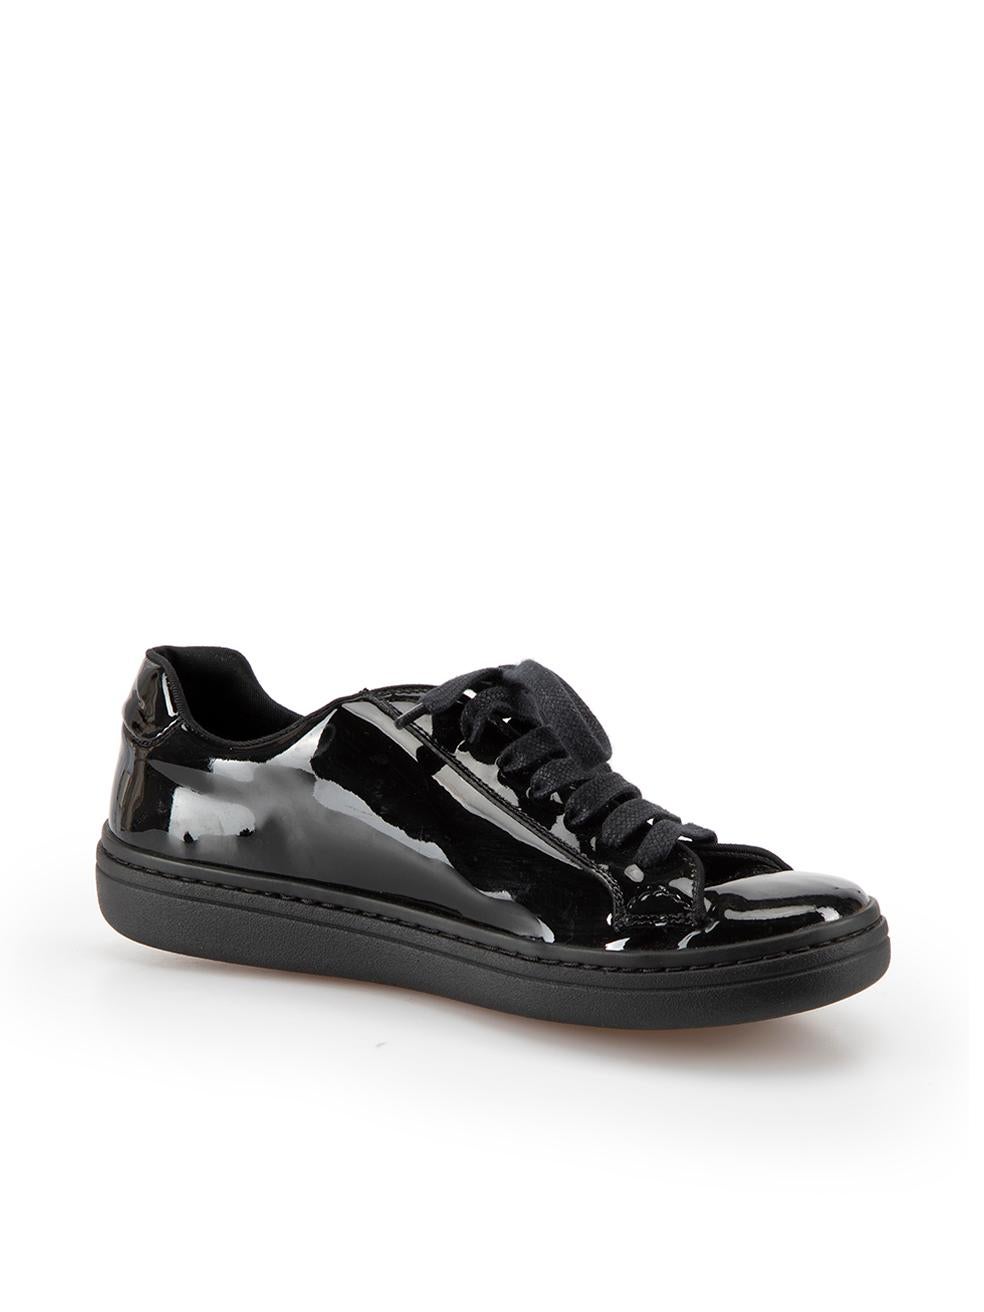 CONDITION is Very good. Hardly any visible wear to trainers is evident on this used Church's designer resale item.



Details


Black

Patent leather

Trainers

Lace fastening

Round toe



 

Made in Italy 

 

Composition

EXTERIOR: Patent